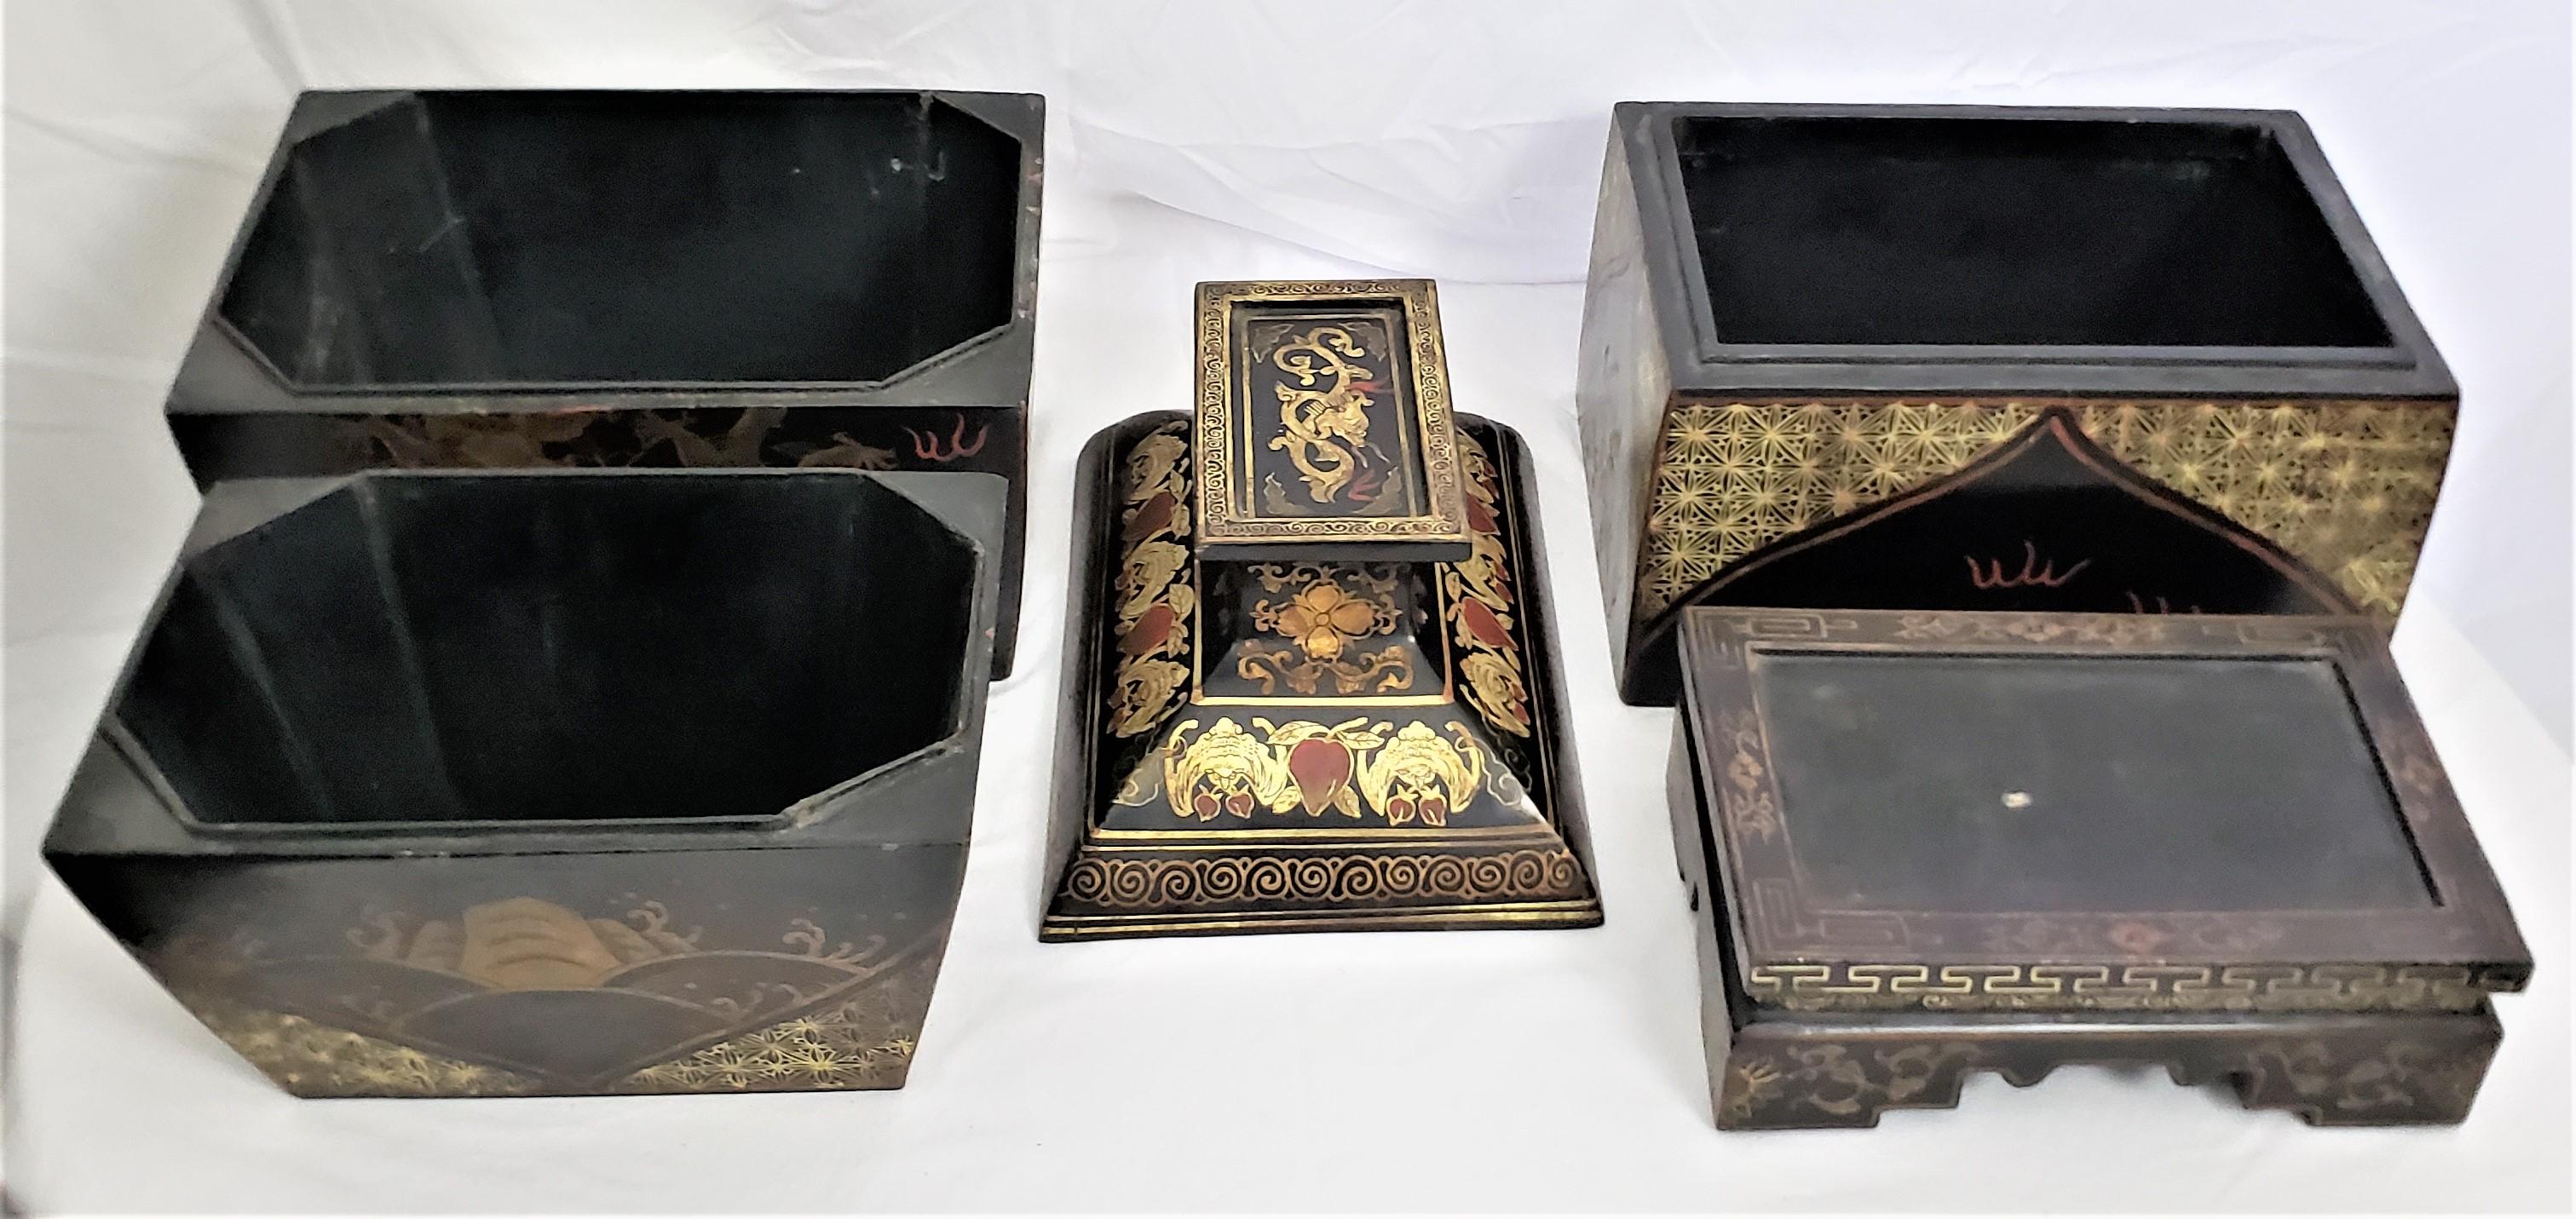 Antique Early Chinese Republic Era Stacking Lacquered Box Set with Dragon Motif For Sale 10